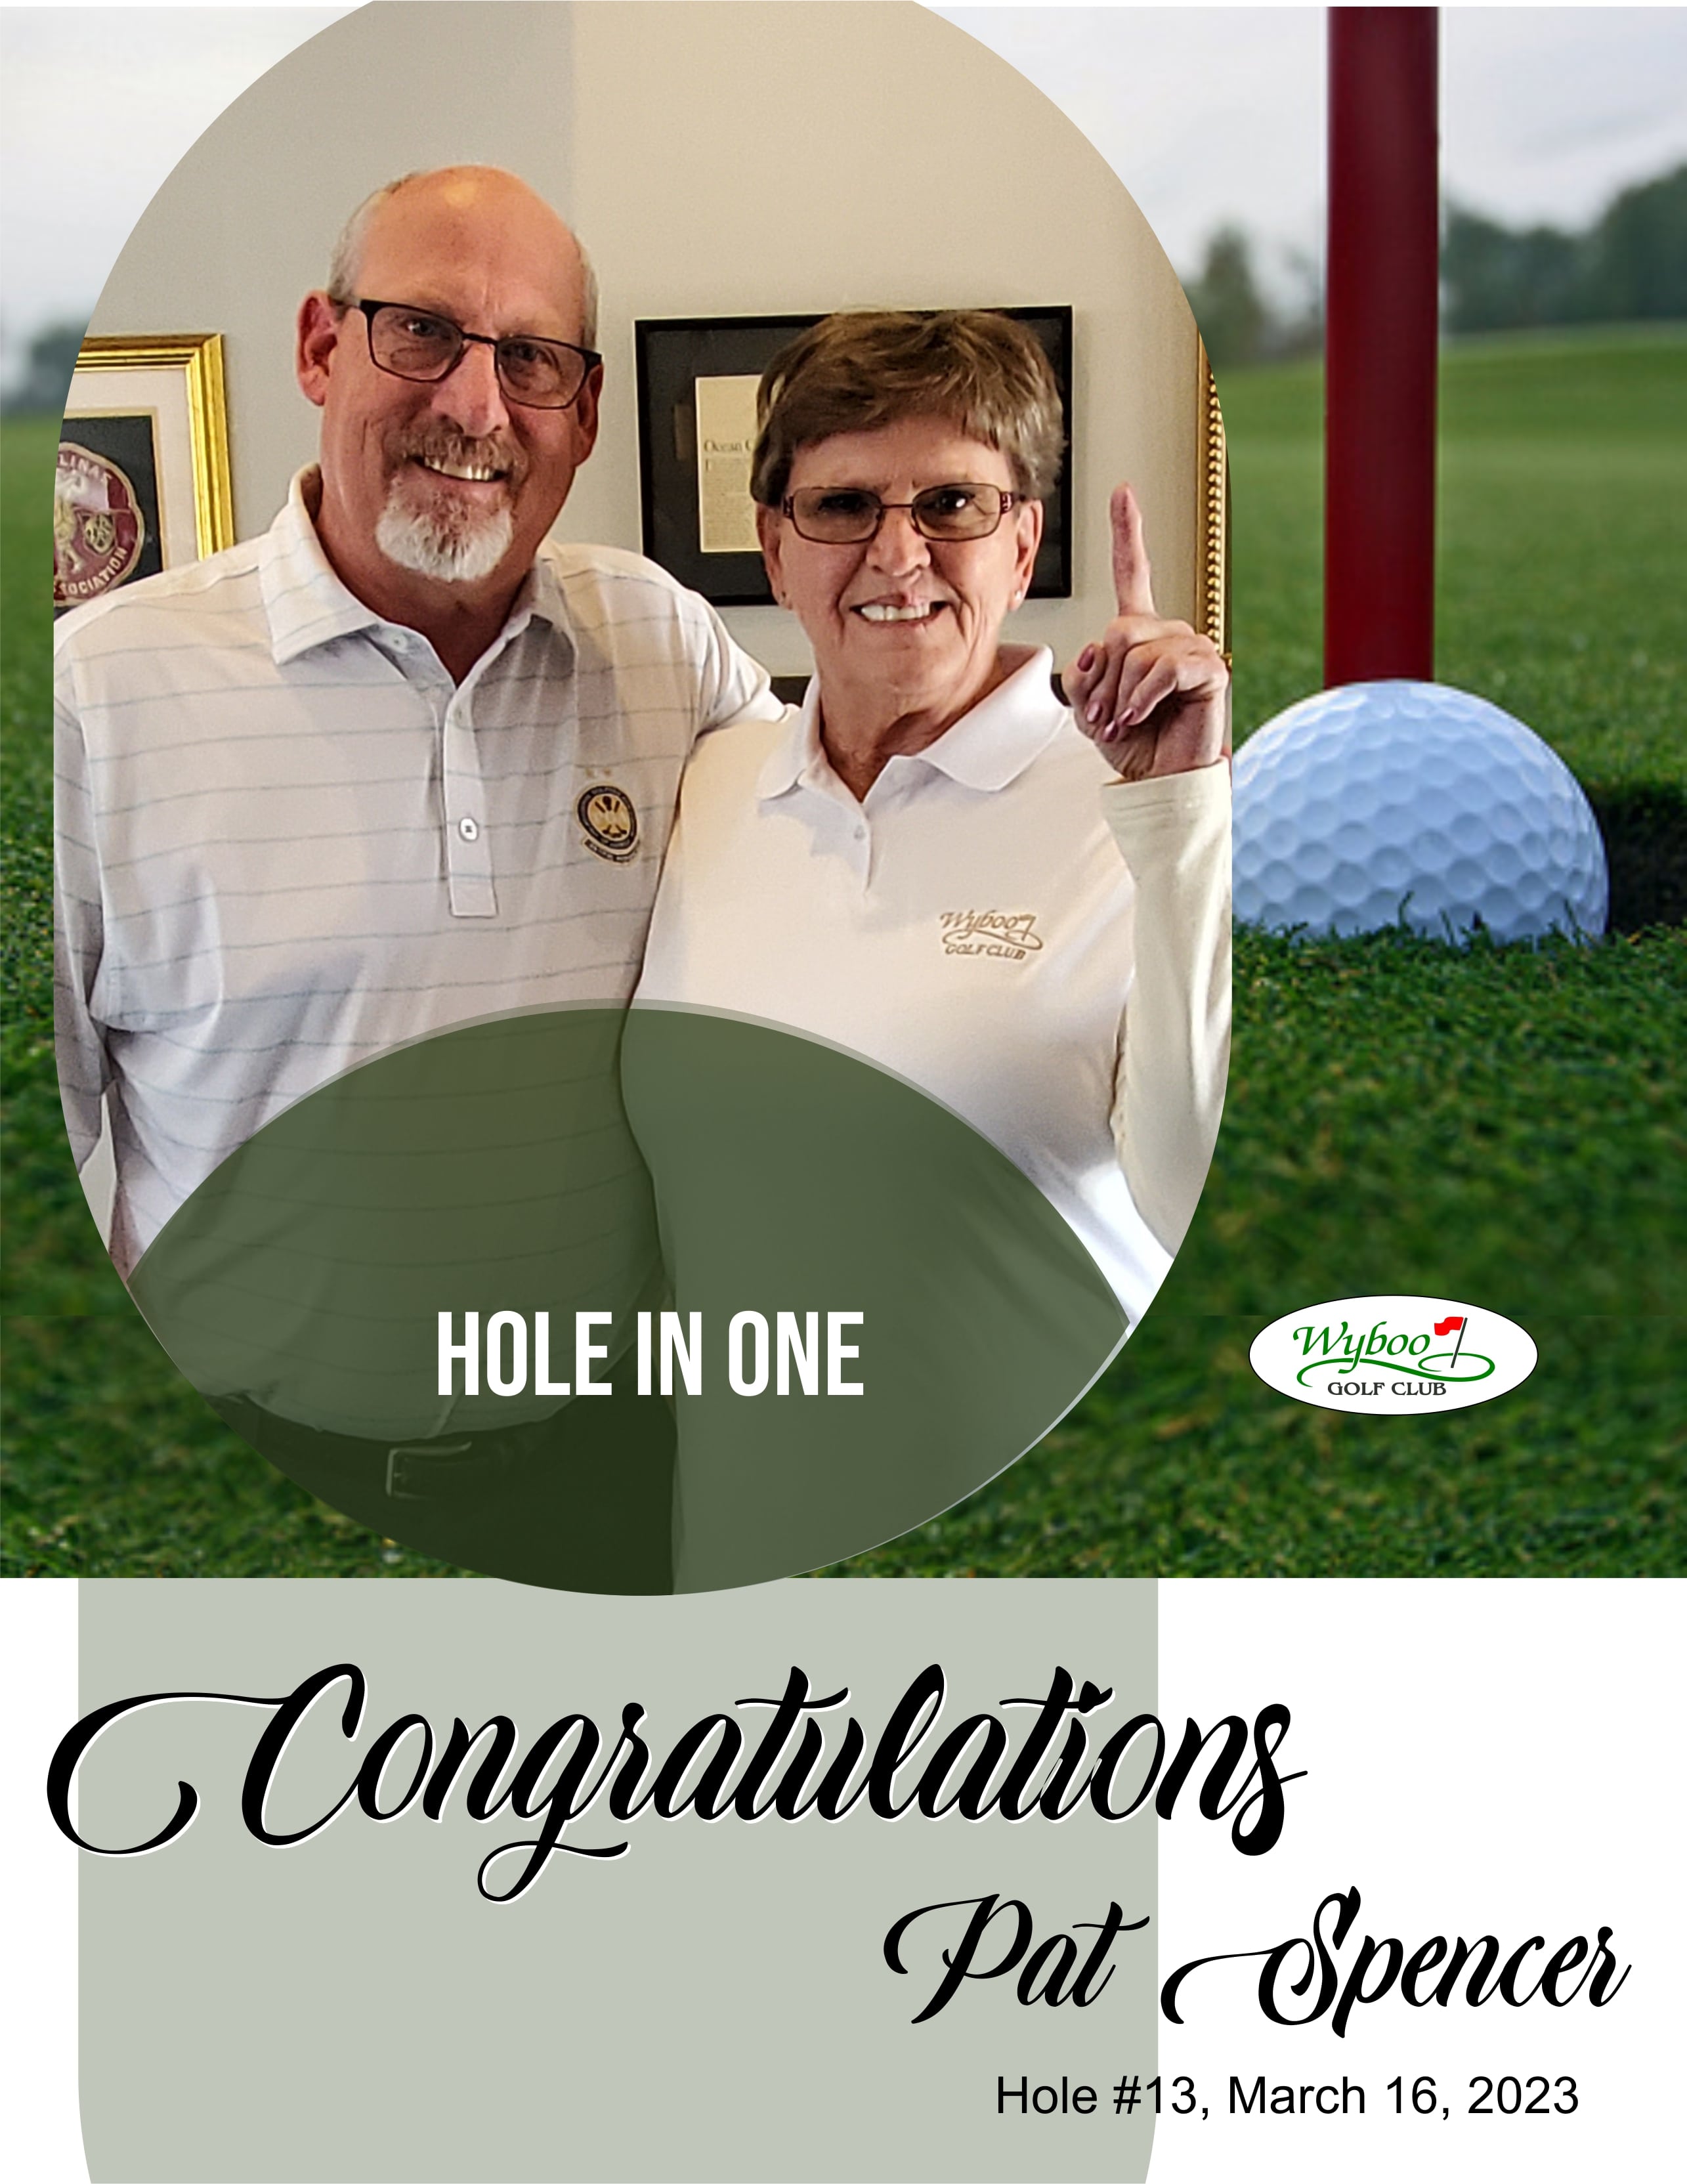 Hole in One Pat Spencer 031623 min